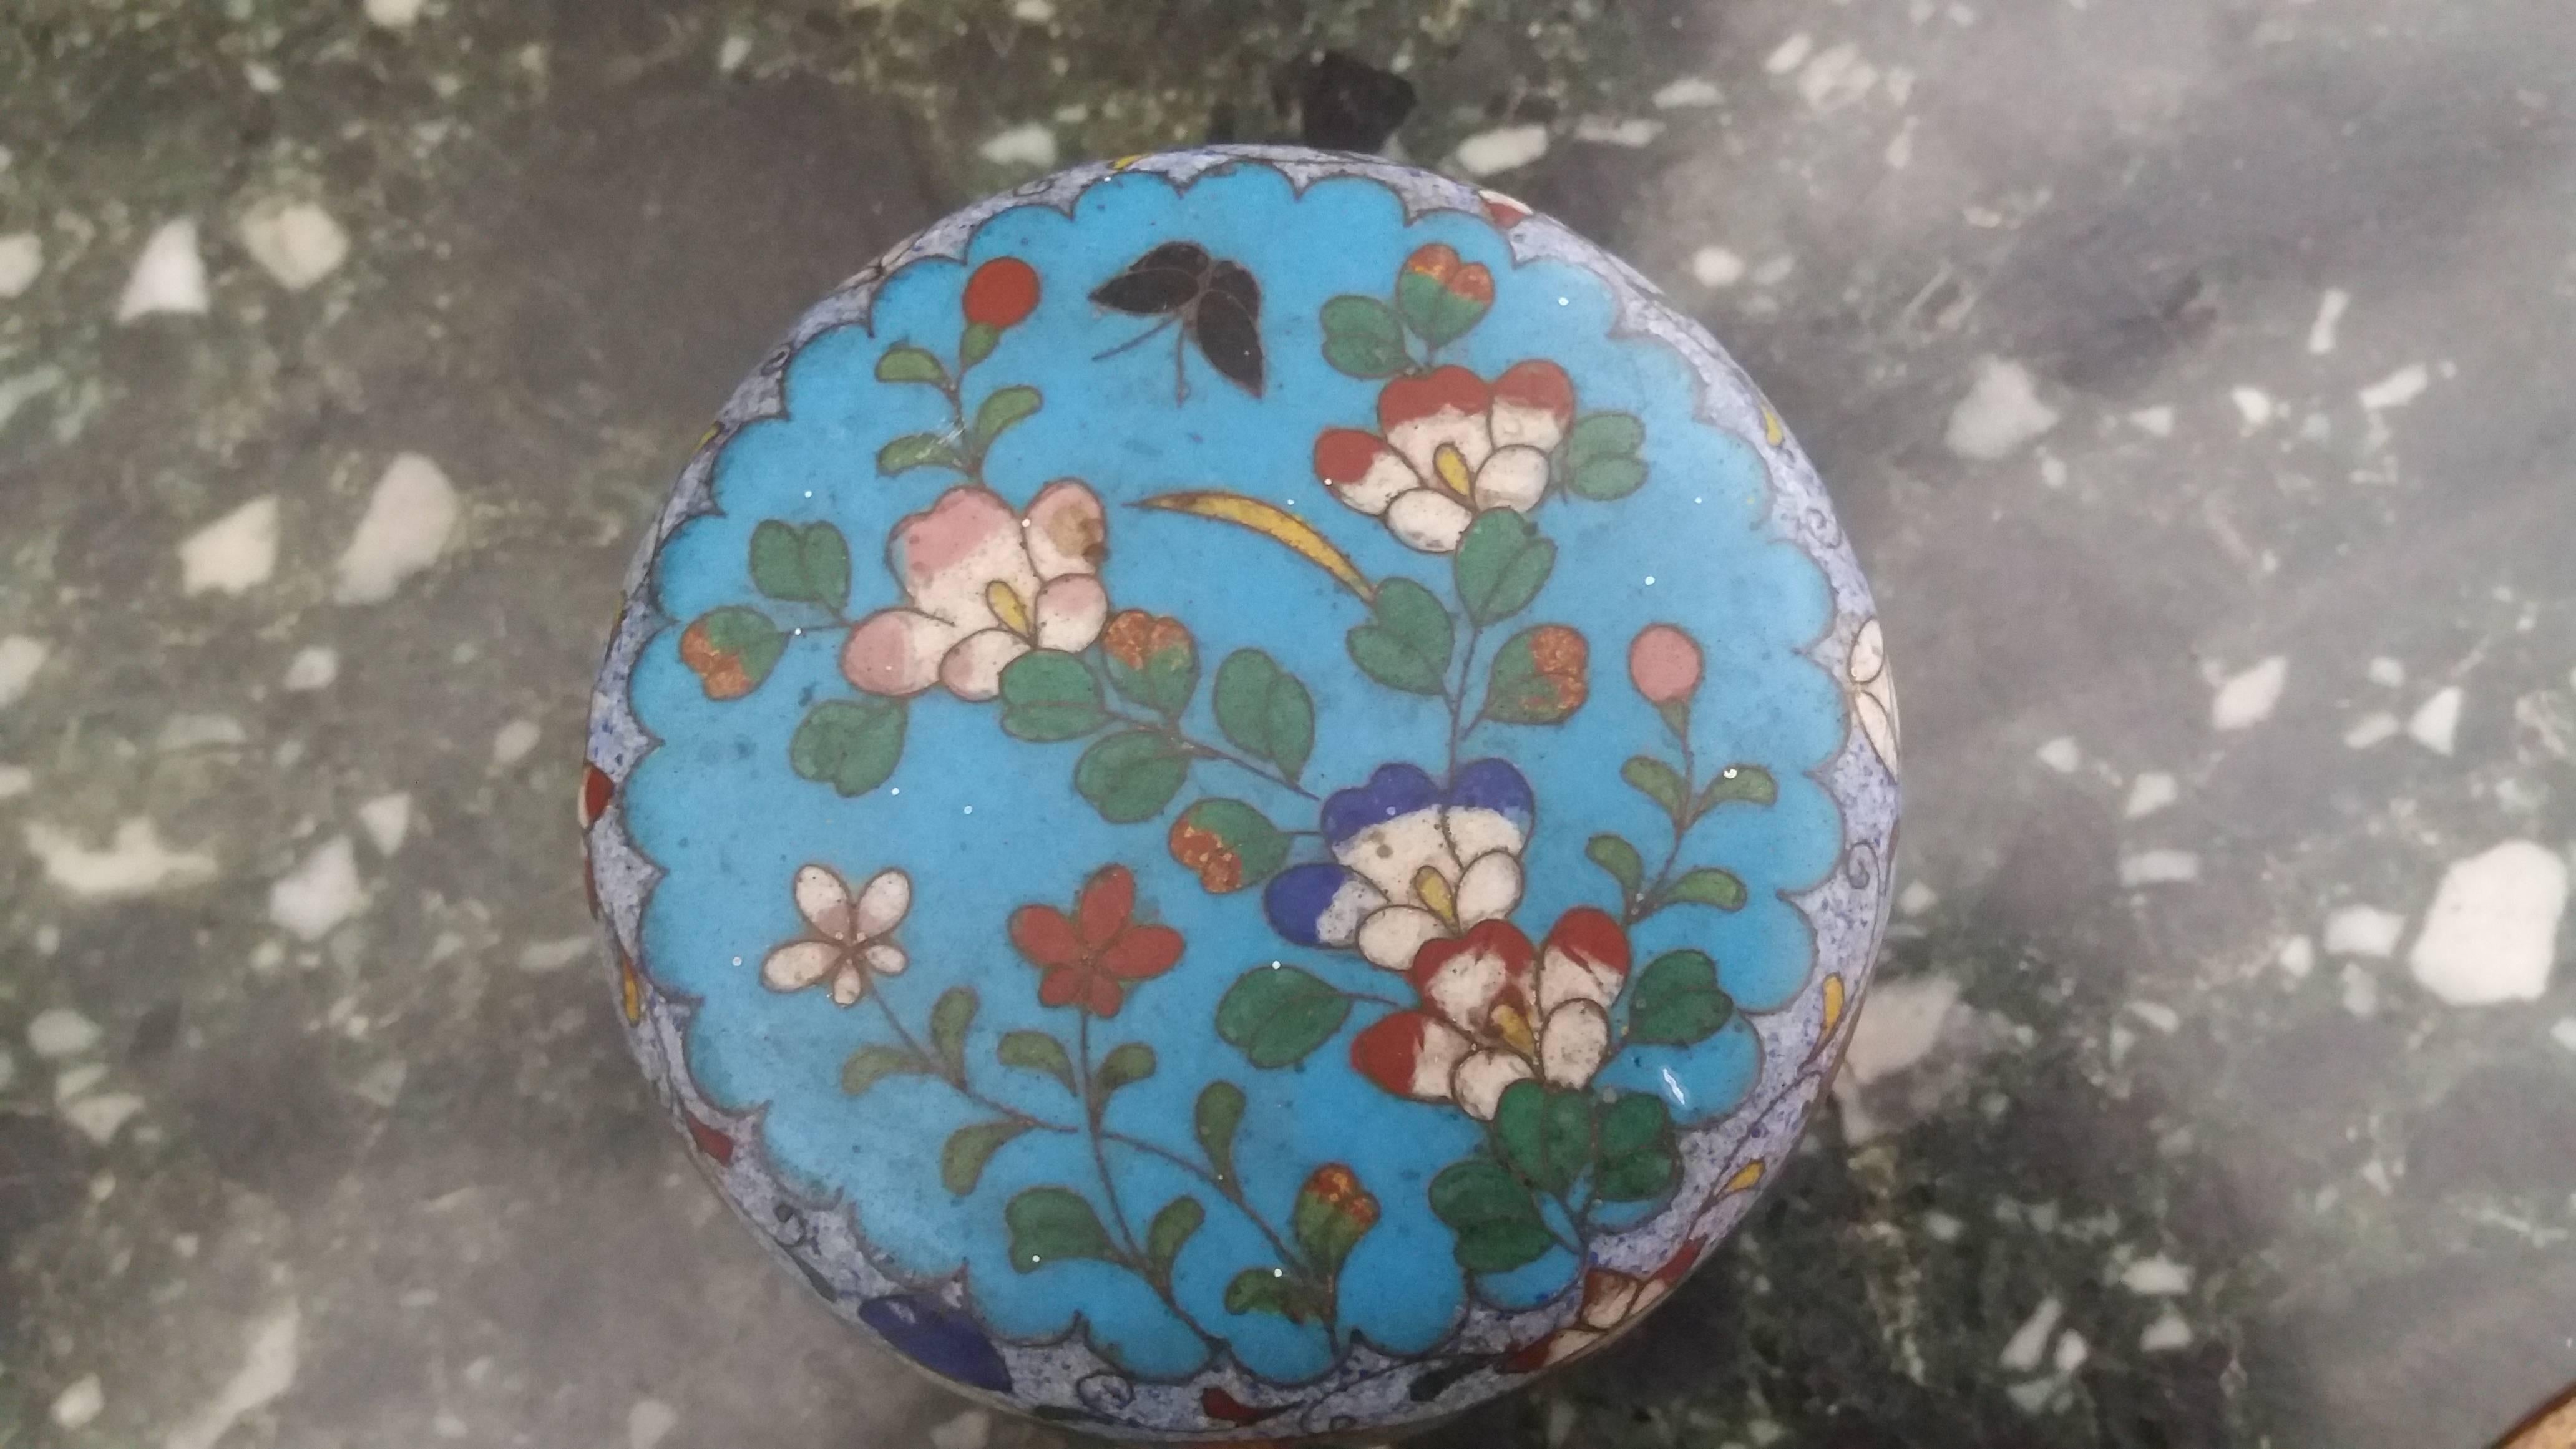 Cloisonnè is an ancient technique for decorating metalwork objects.
Measures: 9cm width and 6 cm height.